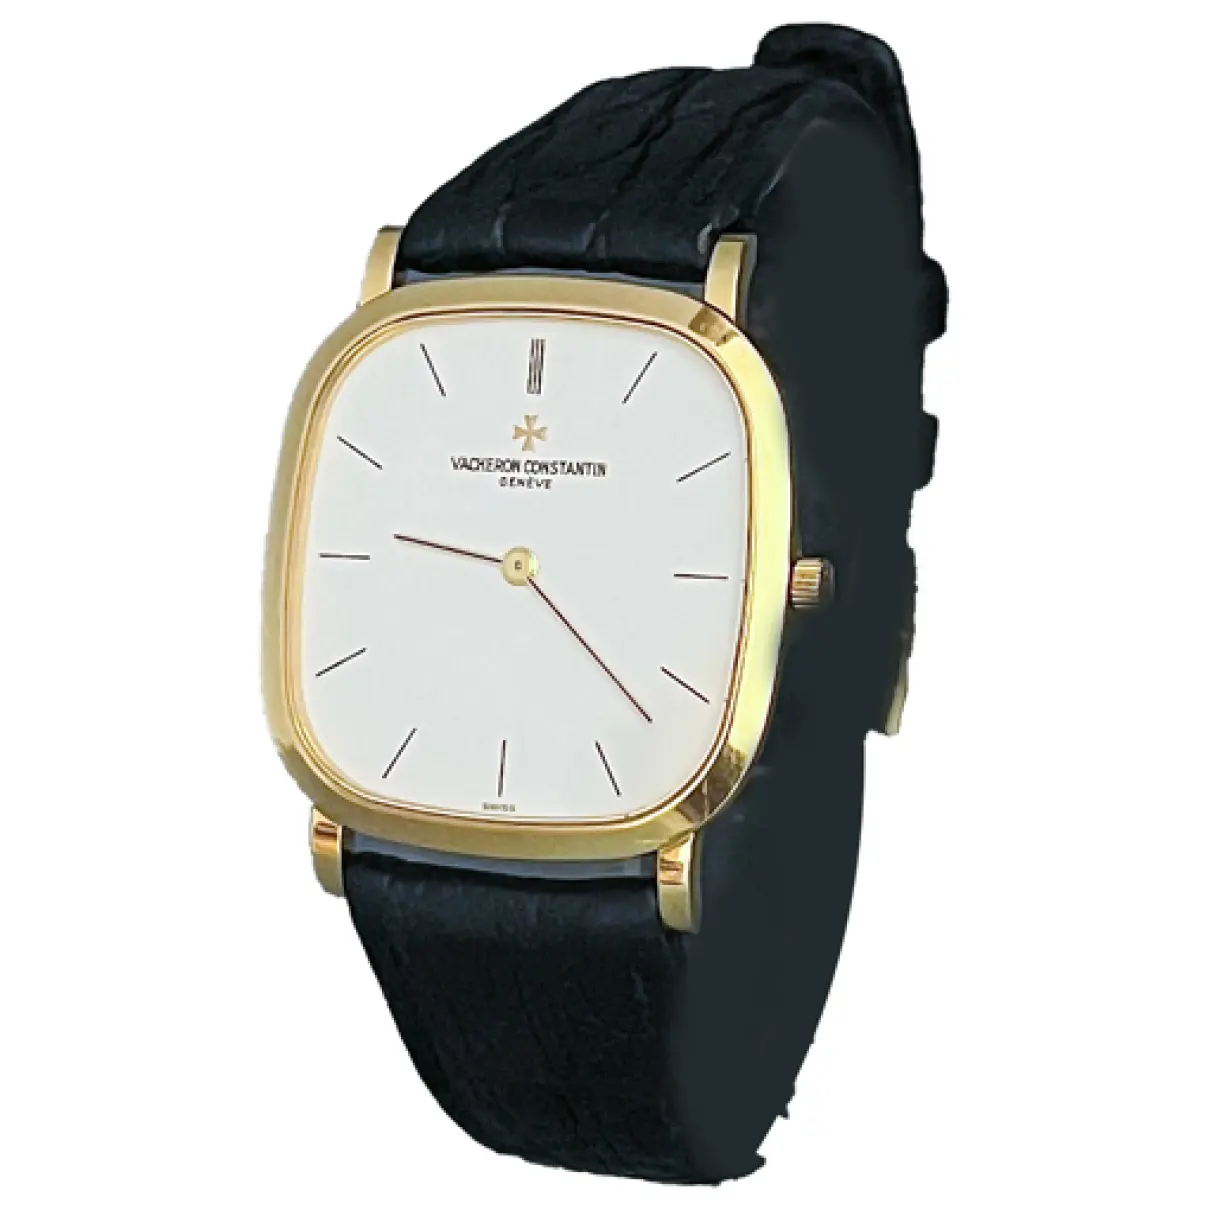 Vintage yellow gold watch